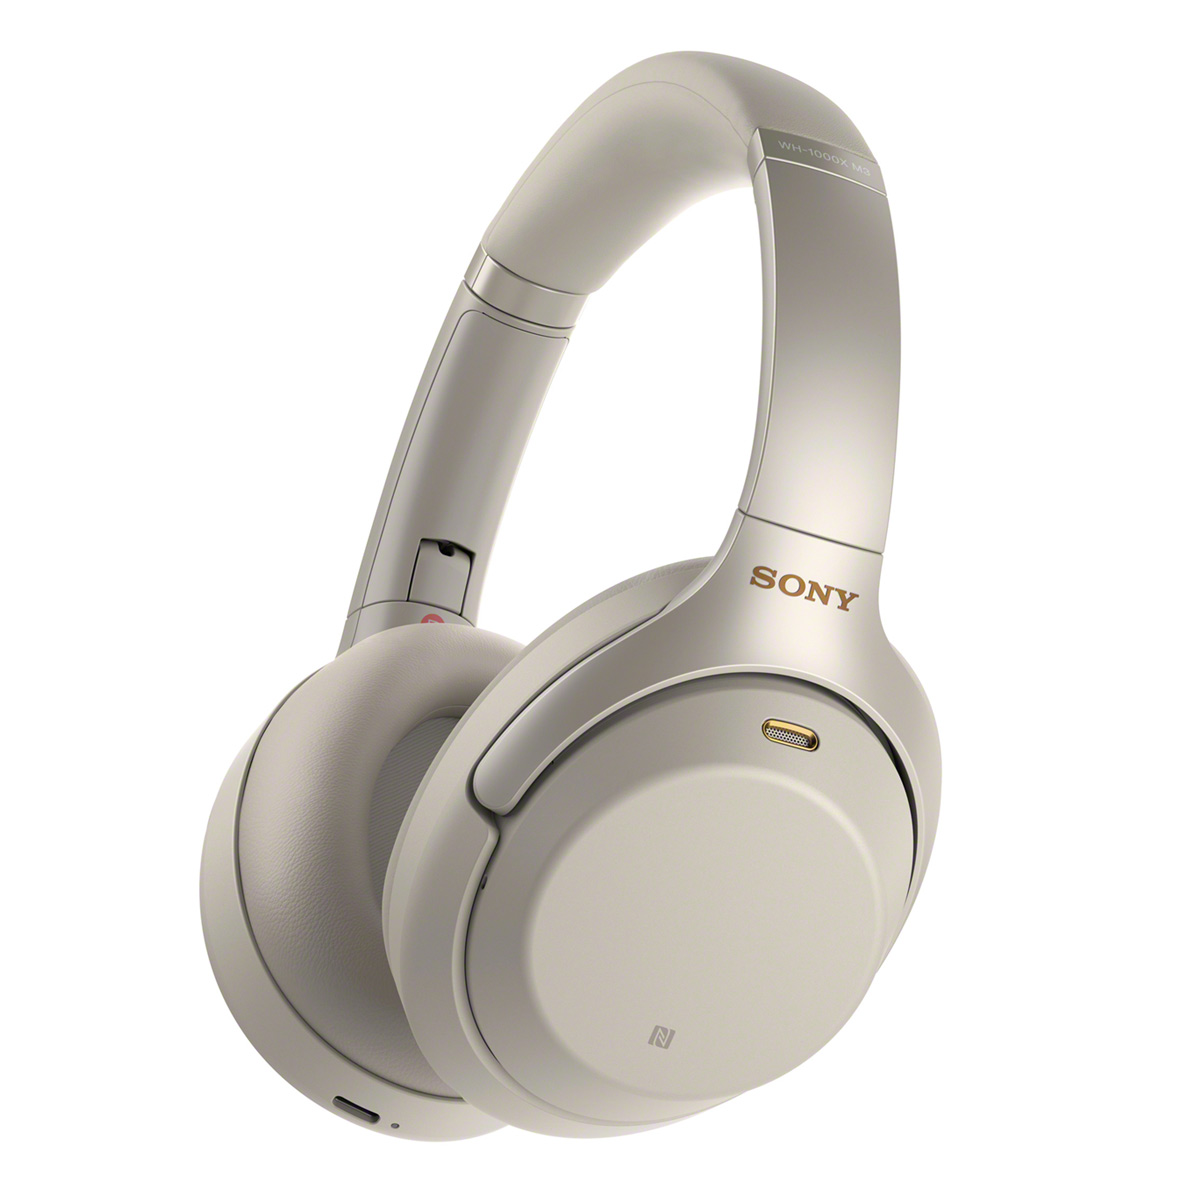 Sony WH1000XM3 Wireless Noise Canceling Over-the-Ear Headphones with Google Assistant - Silver - image 1 of 4